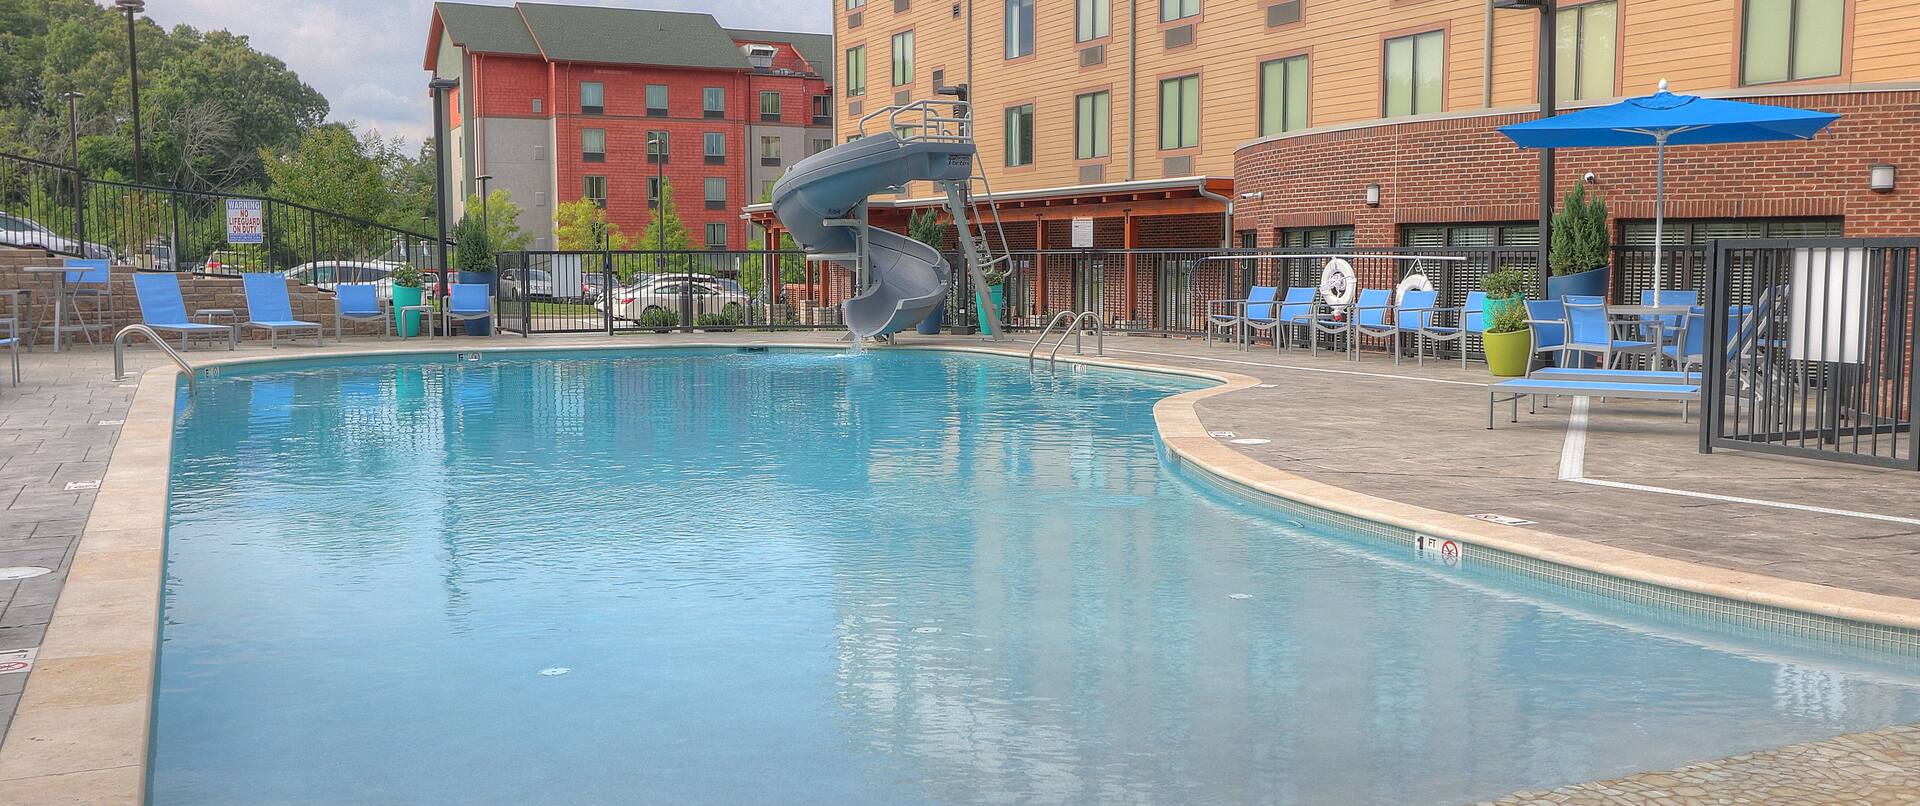 Daytime View of Leisure Seating, Water Slide, and Table With Sun Umbrella by Outdoor Pool and Hotel Exterior